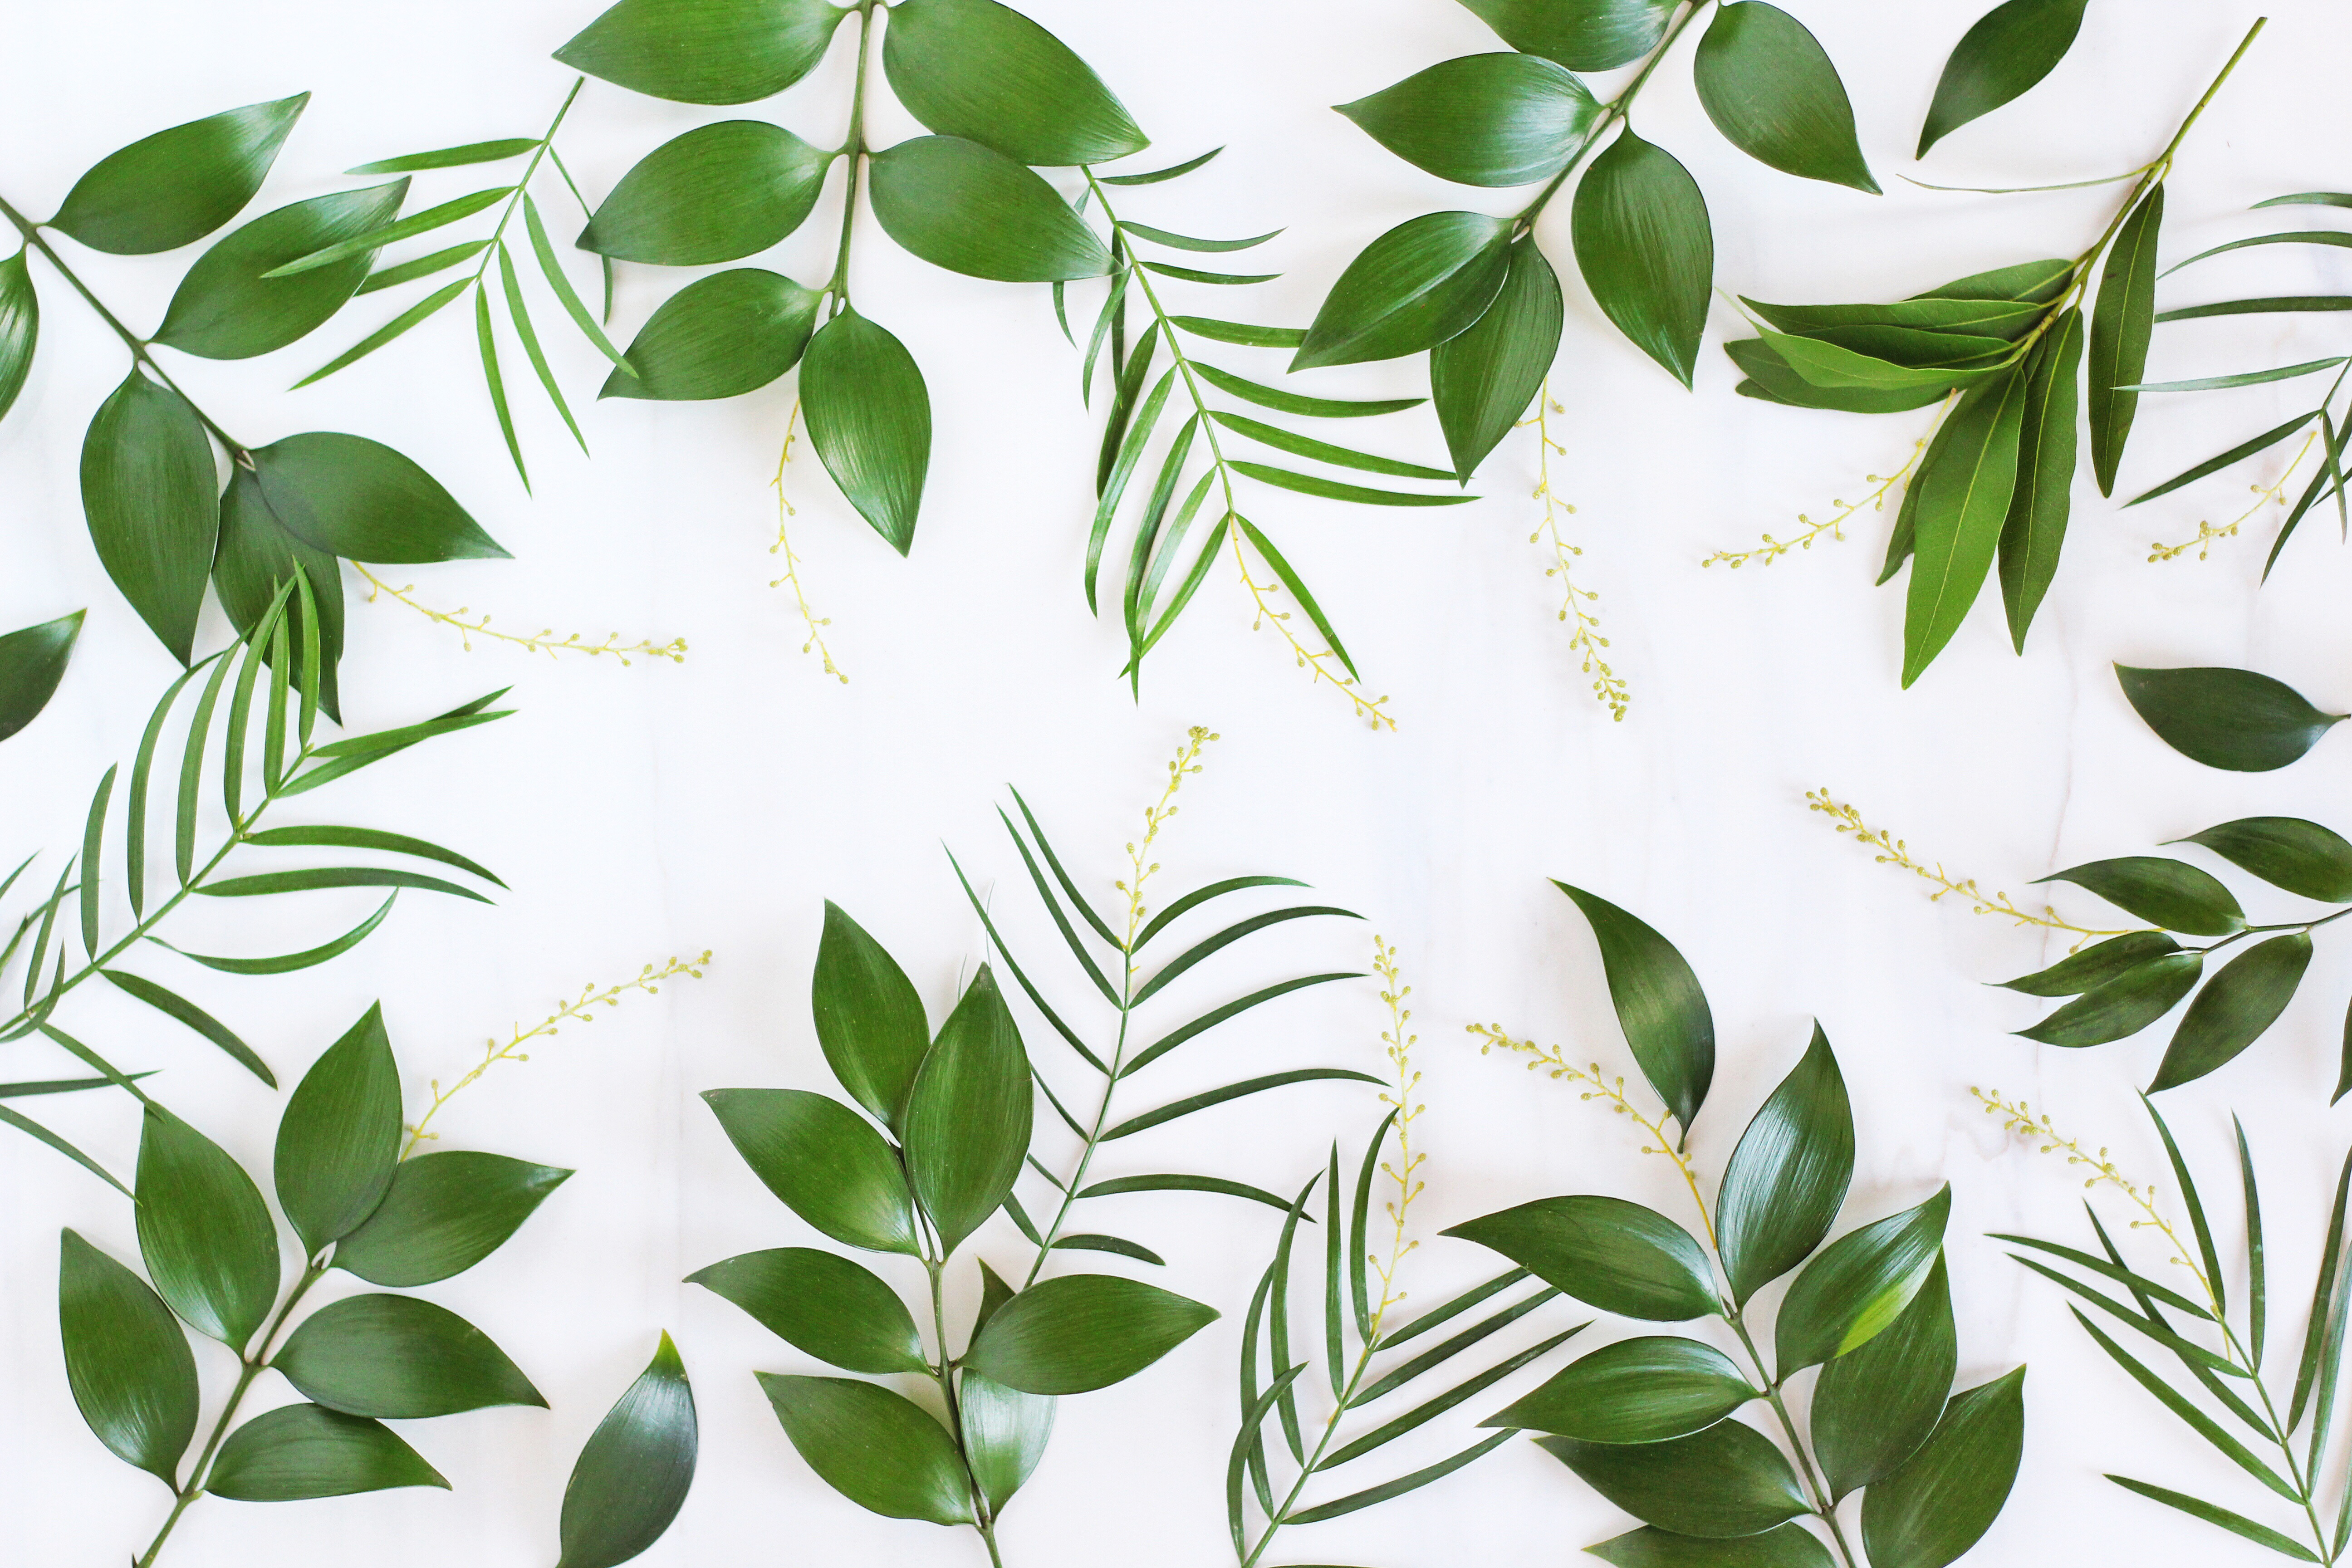 MARCH DIGITAL BLOOMS ROUNDUP | 8 FREE TECH WALLPAPERS - JustineCelina